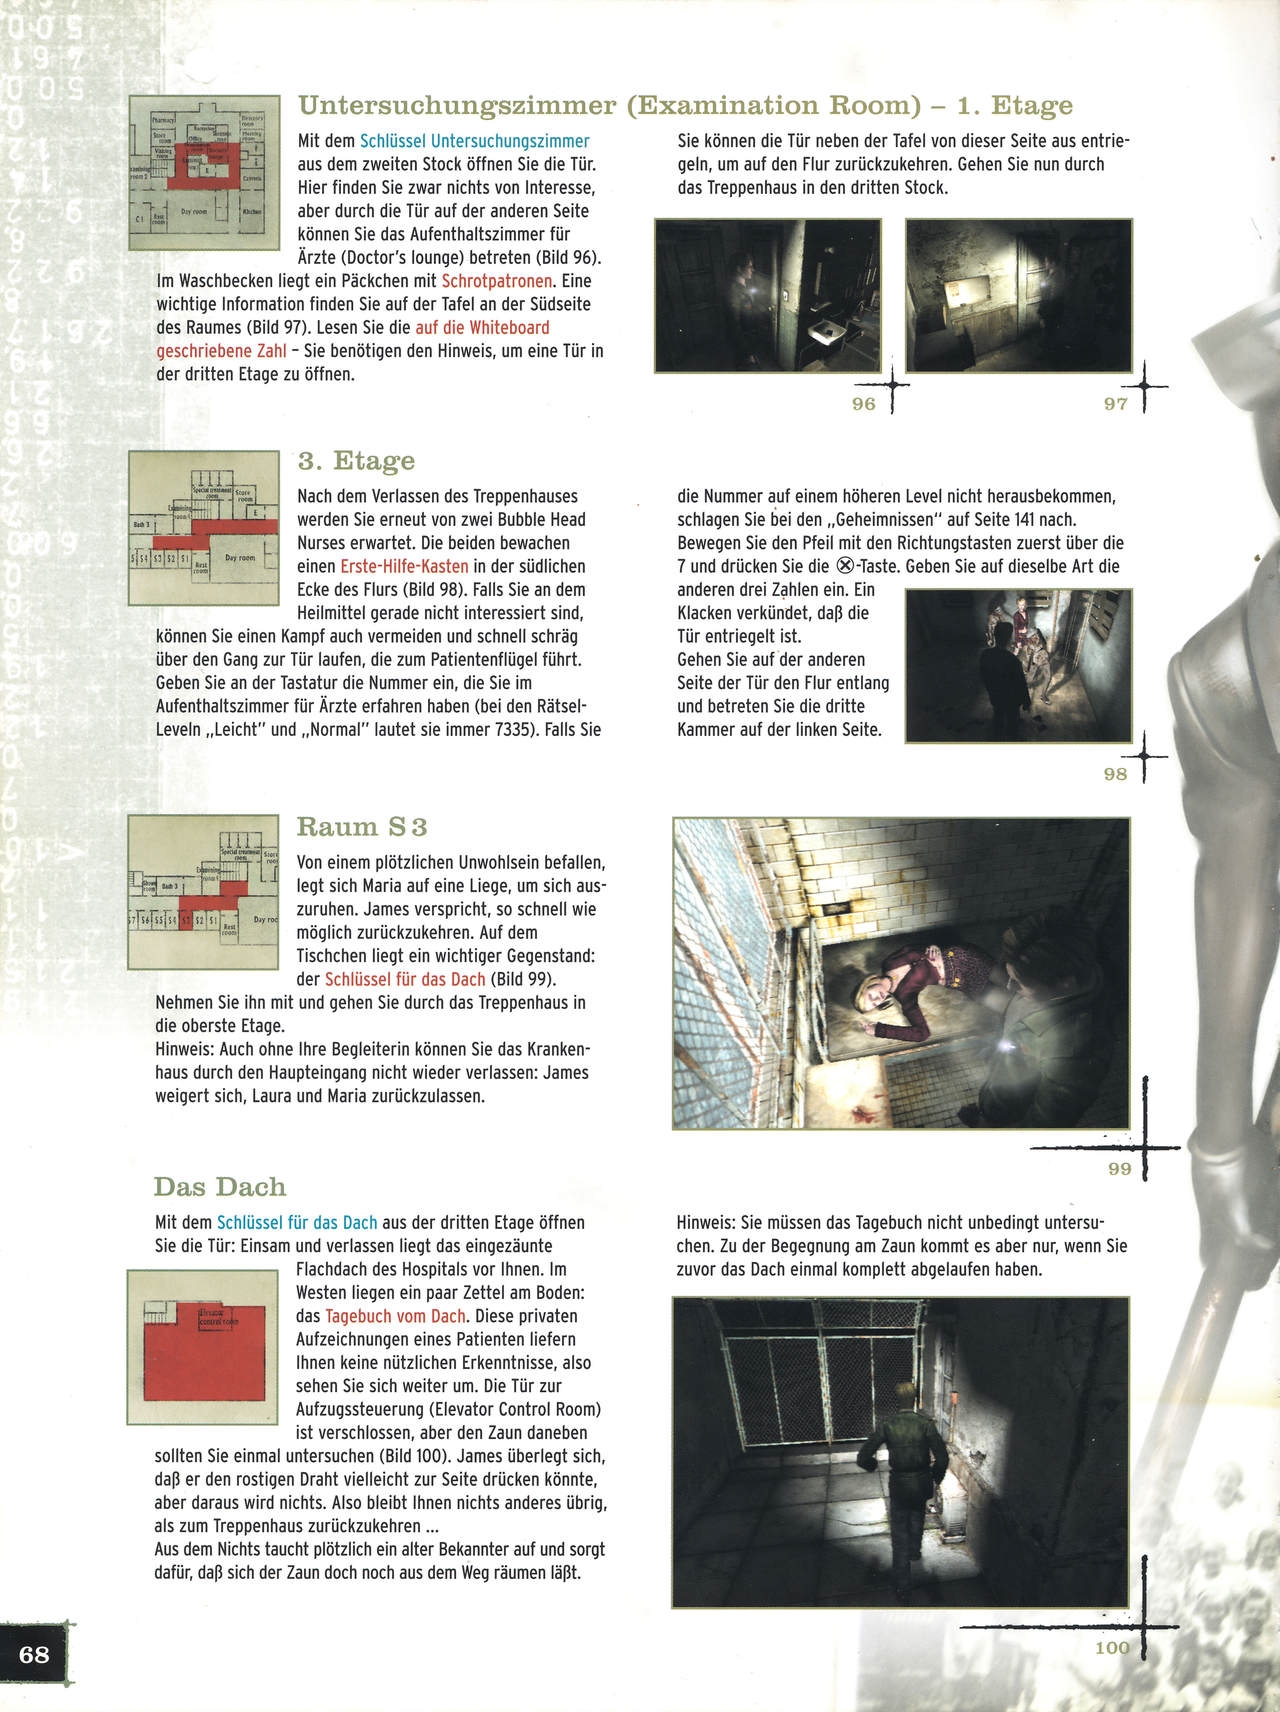 Silent Hill 2 Official Strategy Guide Authoritzed Collection 67